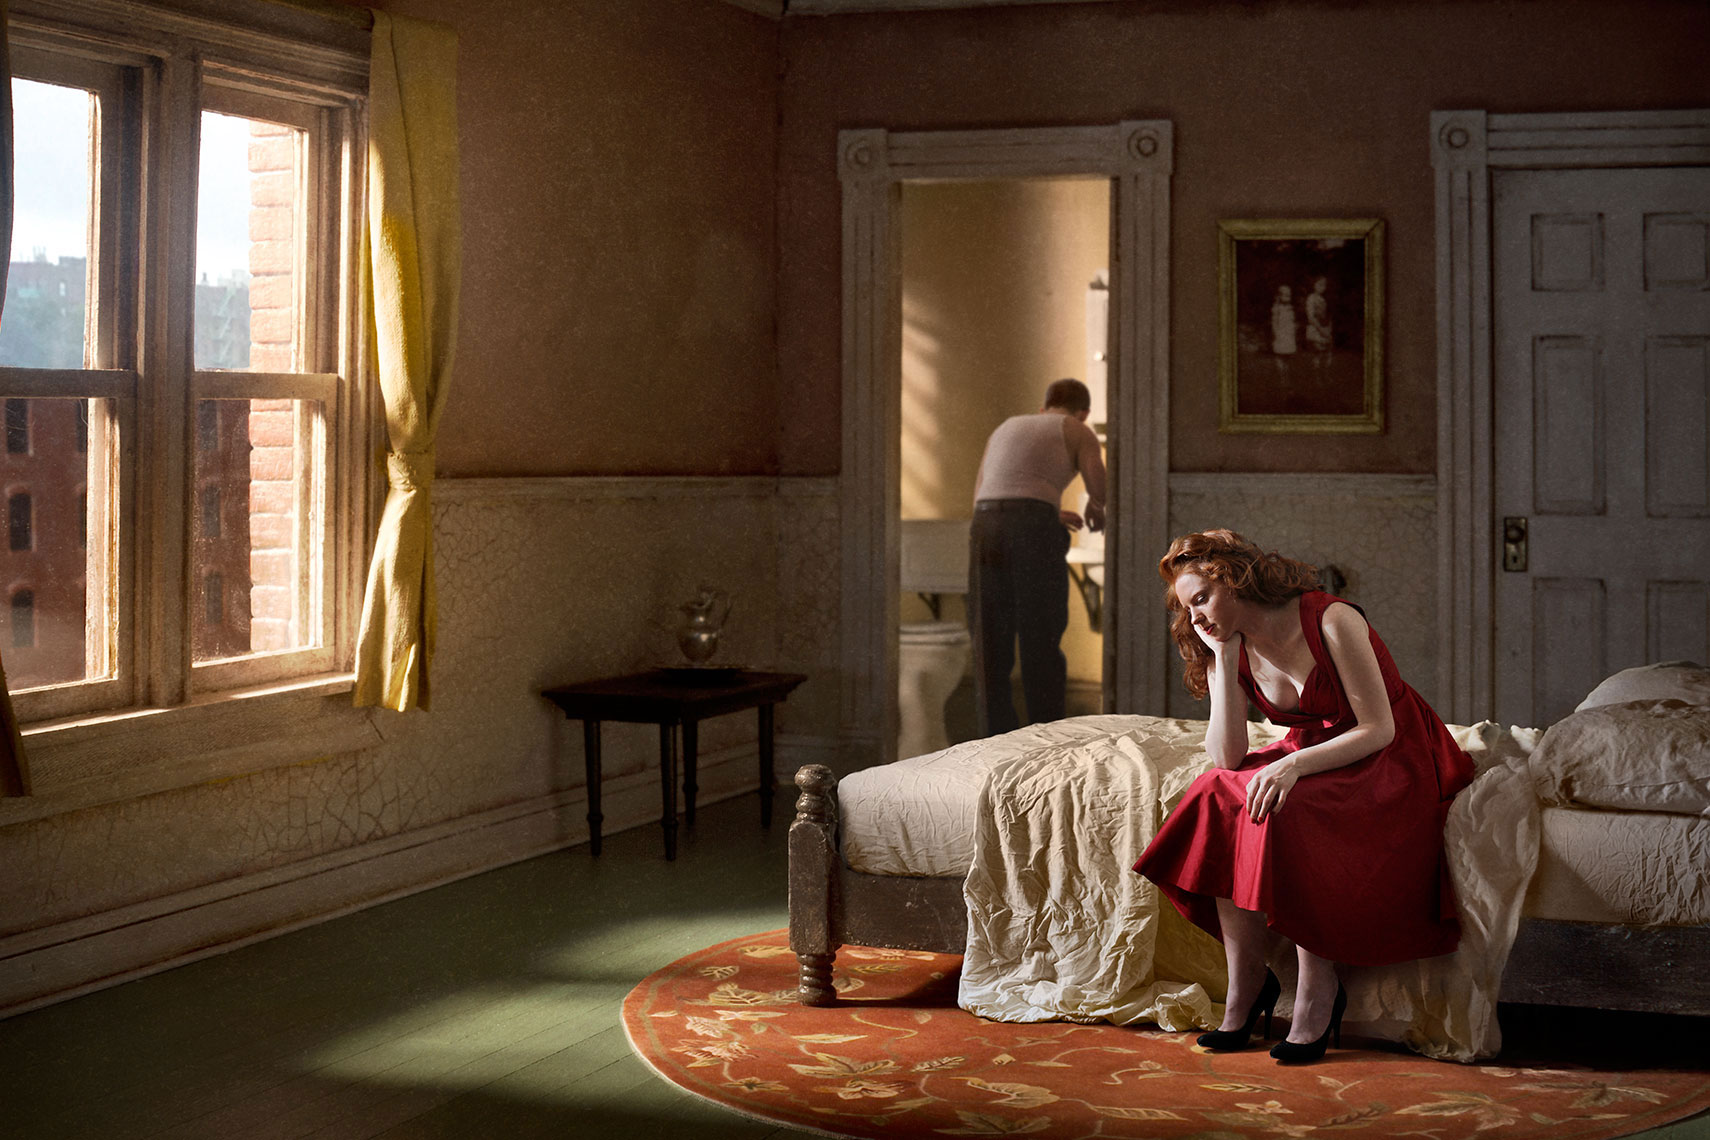 Young red-haired woman in red dress, sits on an unmade bed in a sunlit 1940s’ New York apartment while her male companion is in undershirt at the bathroom sink in the background.